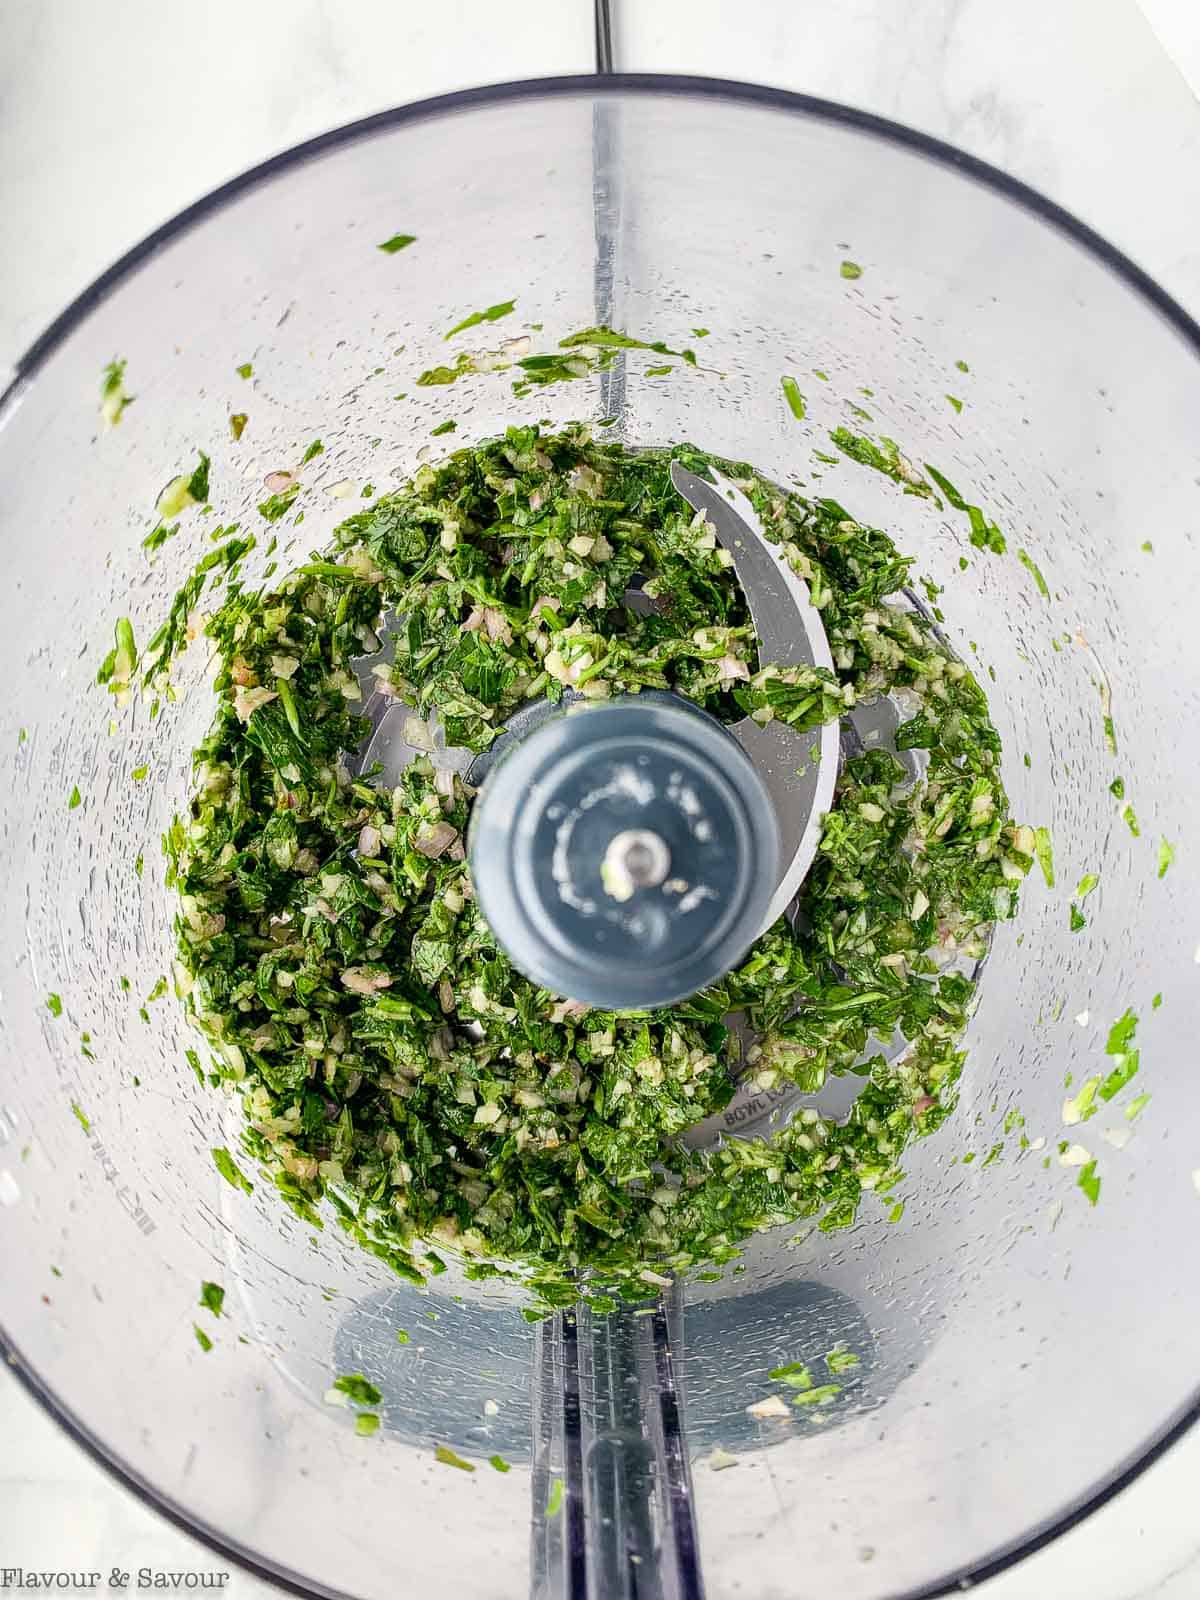 process herbs for salmon chimichurri sauce in a food processor